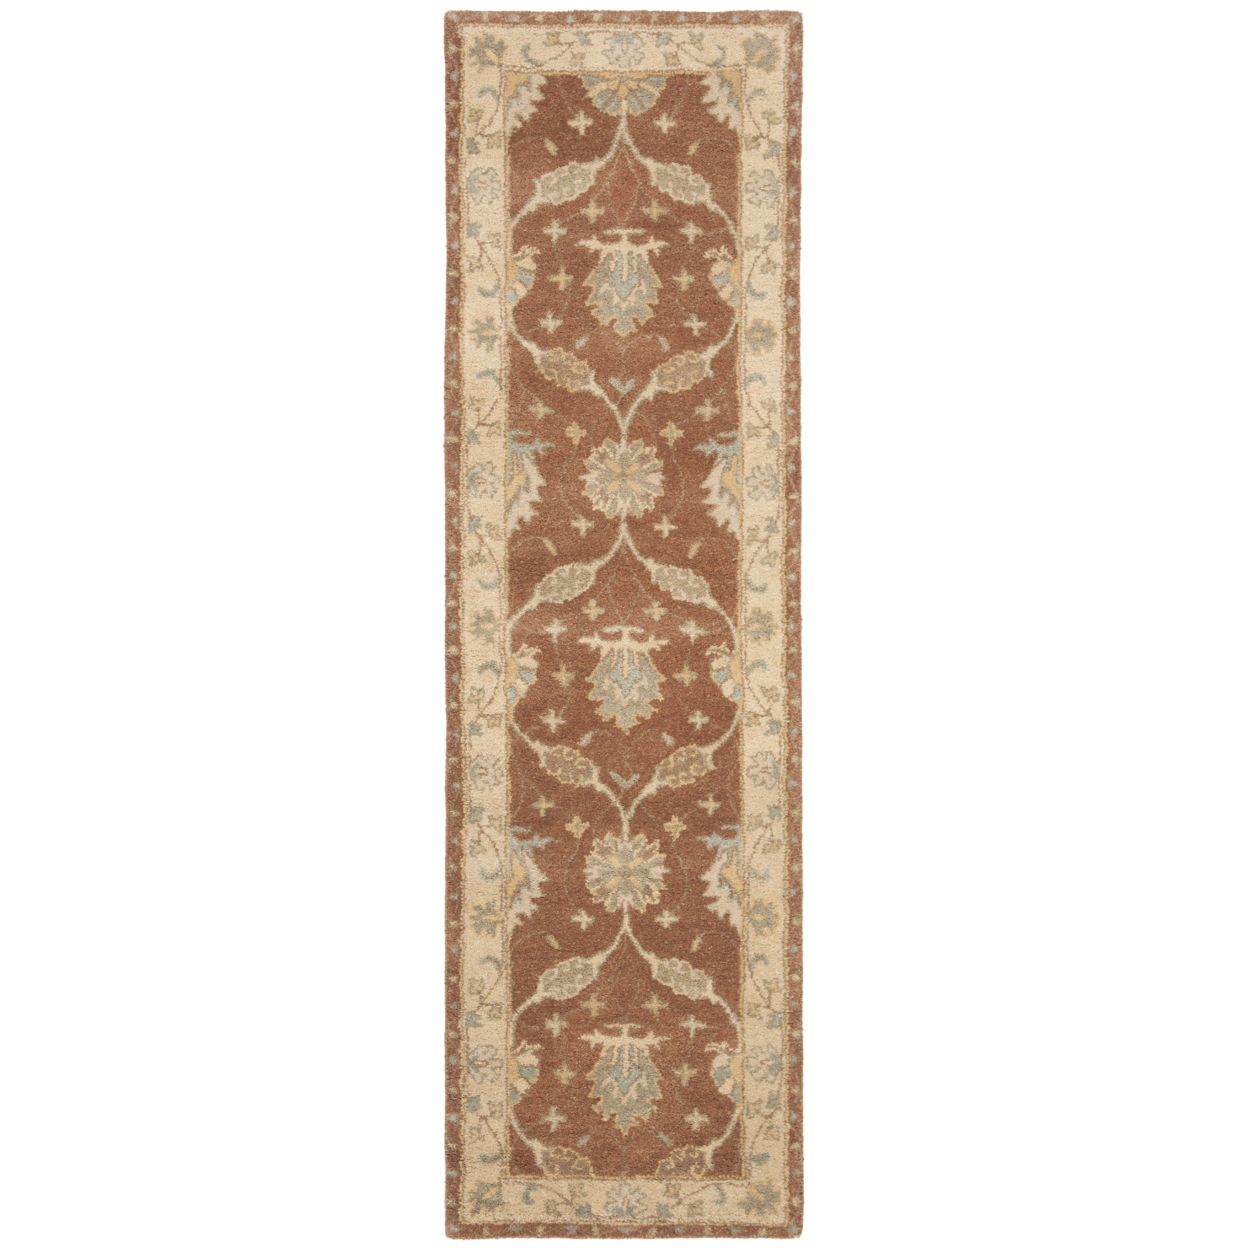 SAFAVIEH Antiquity AT315A Handmade Brown / Taupe Rug - 2' 3 X 10'